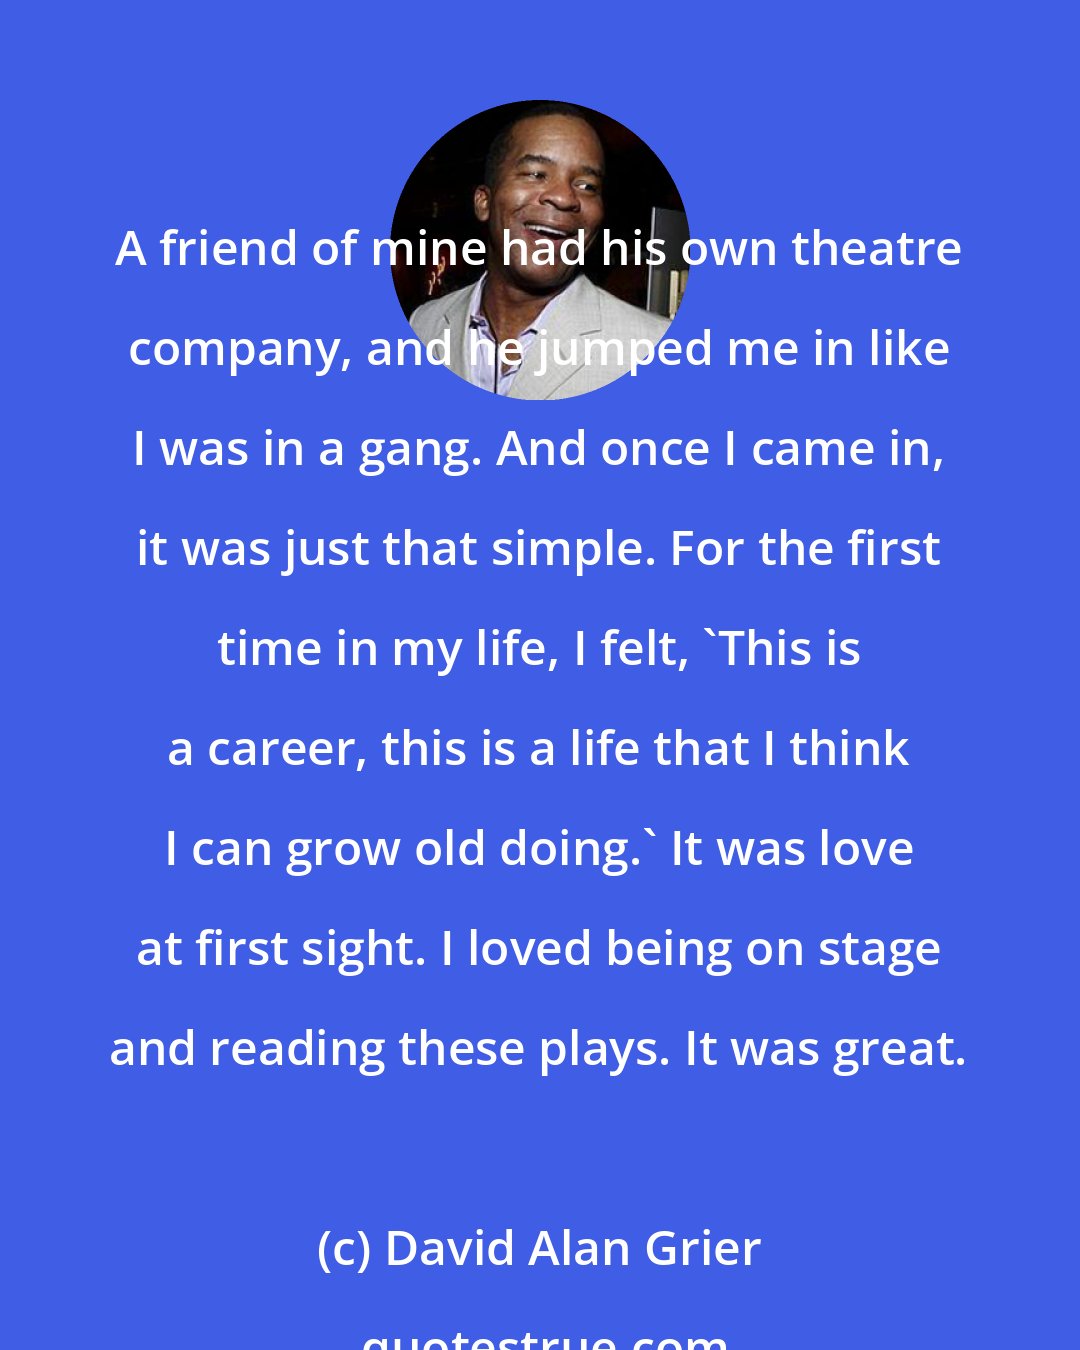 David Alan Grier: A friend of mine had his own theatre company, and he jumped me in like I was in a gang. And once I came in, it was just that simple. For the first time in my life, I felt, 'This is a career, this is a life that I think I can grow old doing.' It was love at first sight. I loved being on stage and reading these plays. It was great.